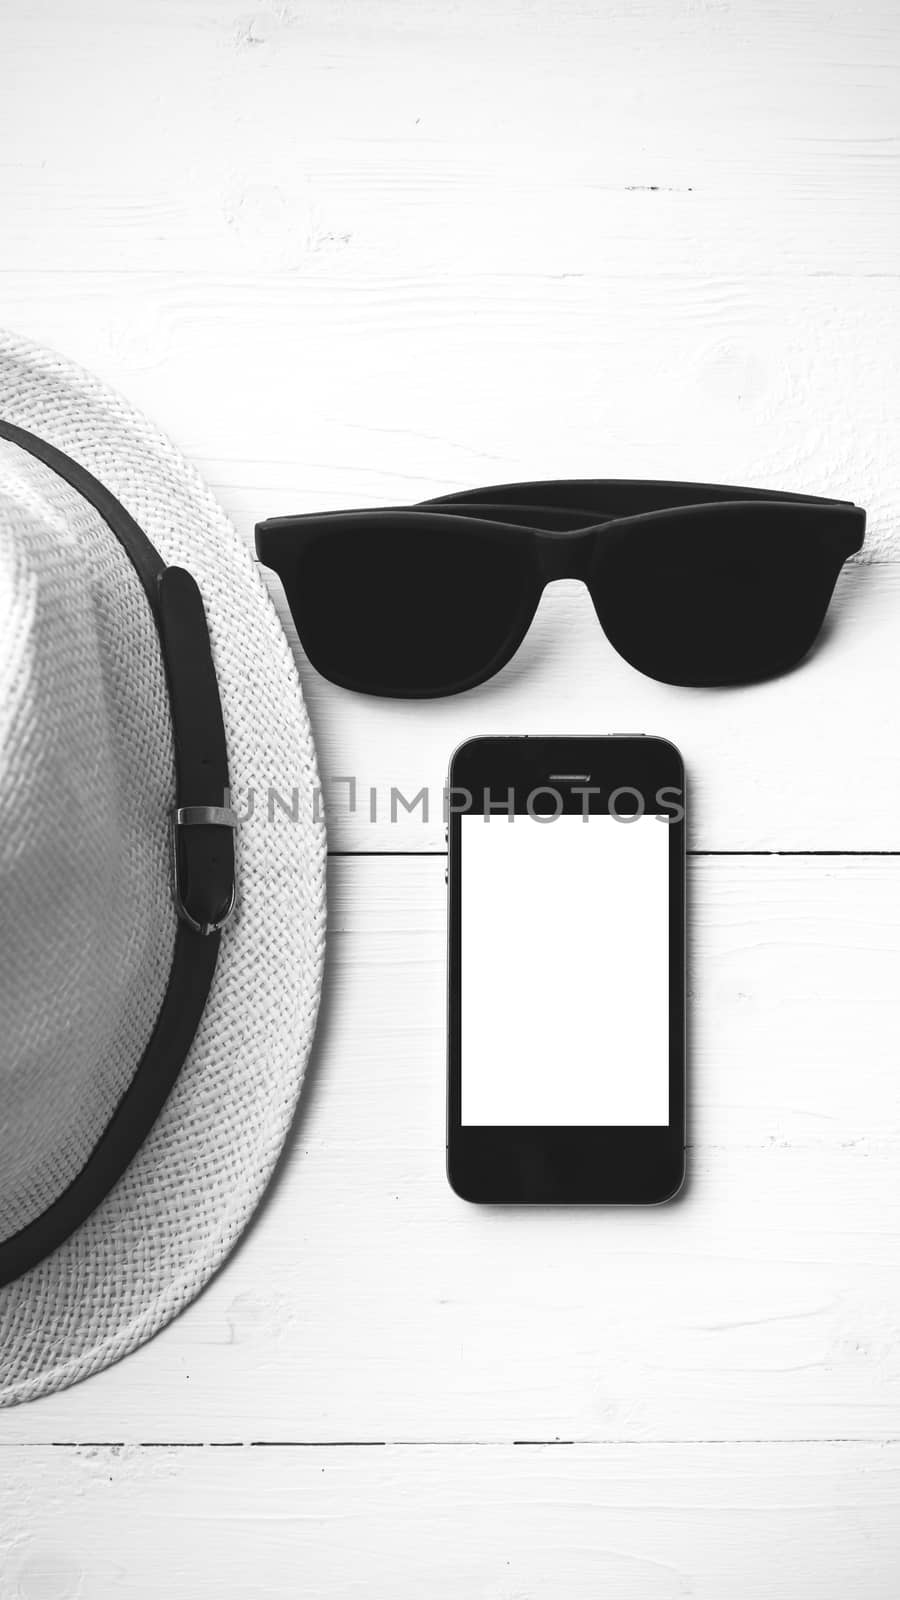 hat sunglasses and smart phone on white table black and white color